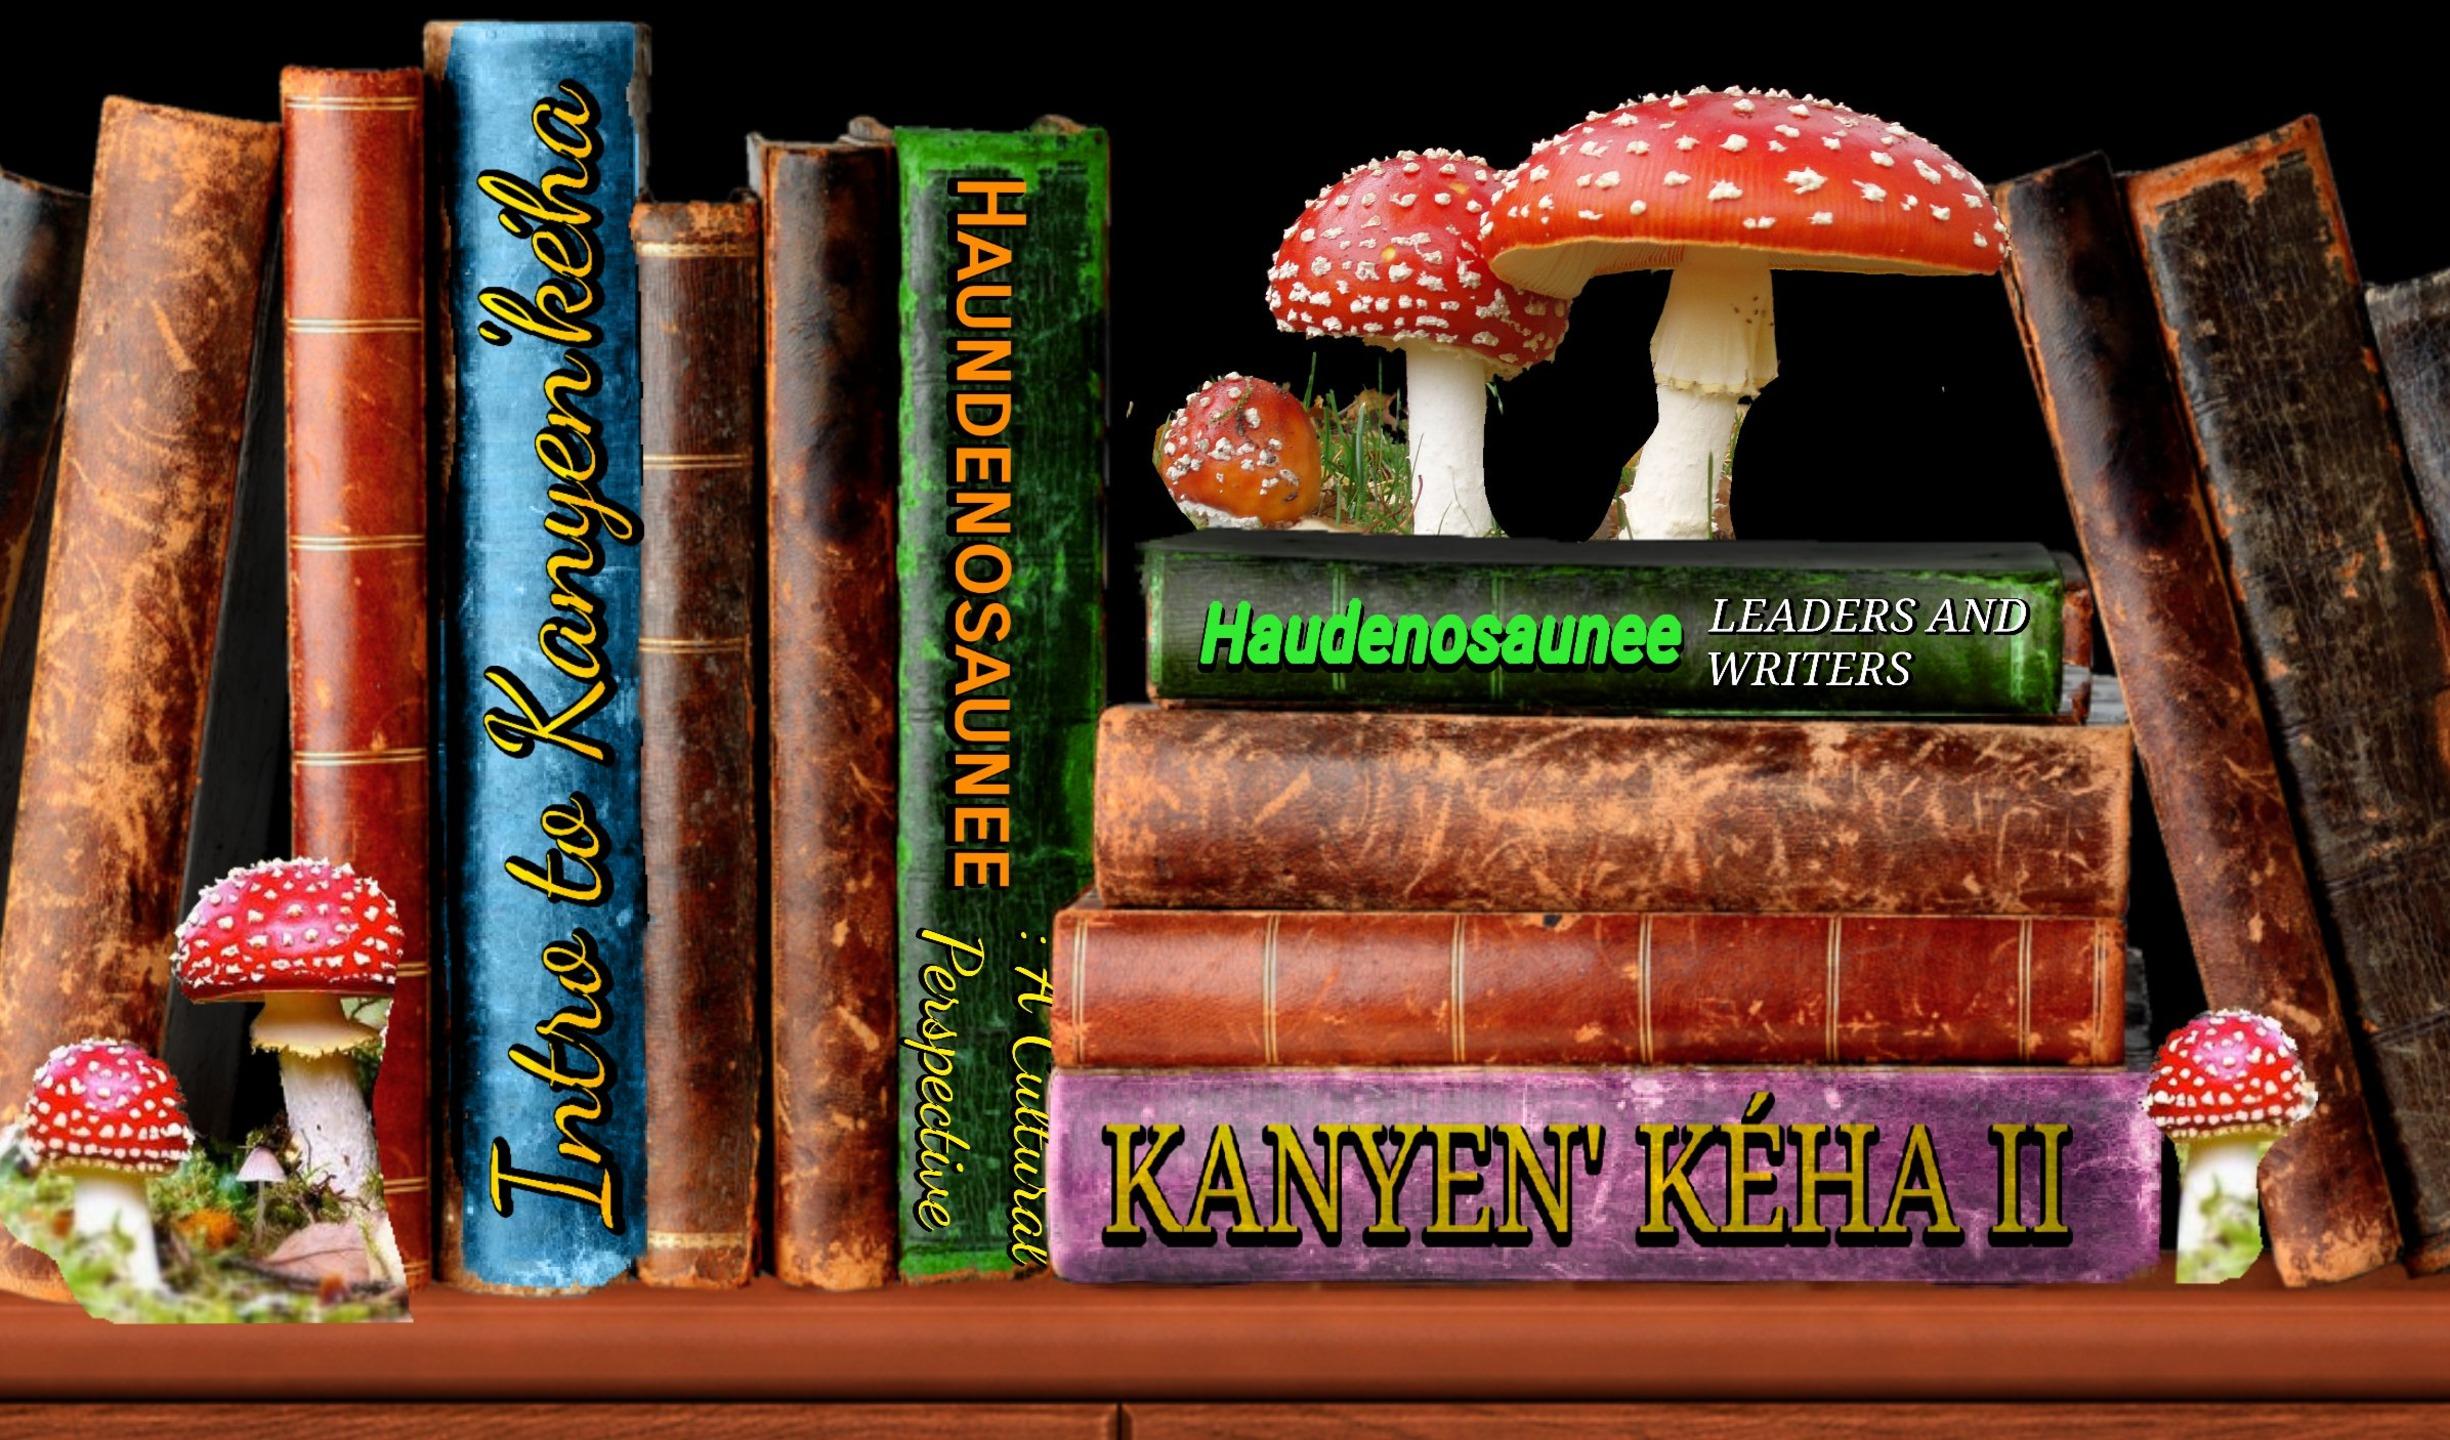 A bookshelf filled with old books that have some red mushrooms placed on top.